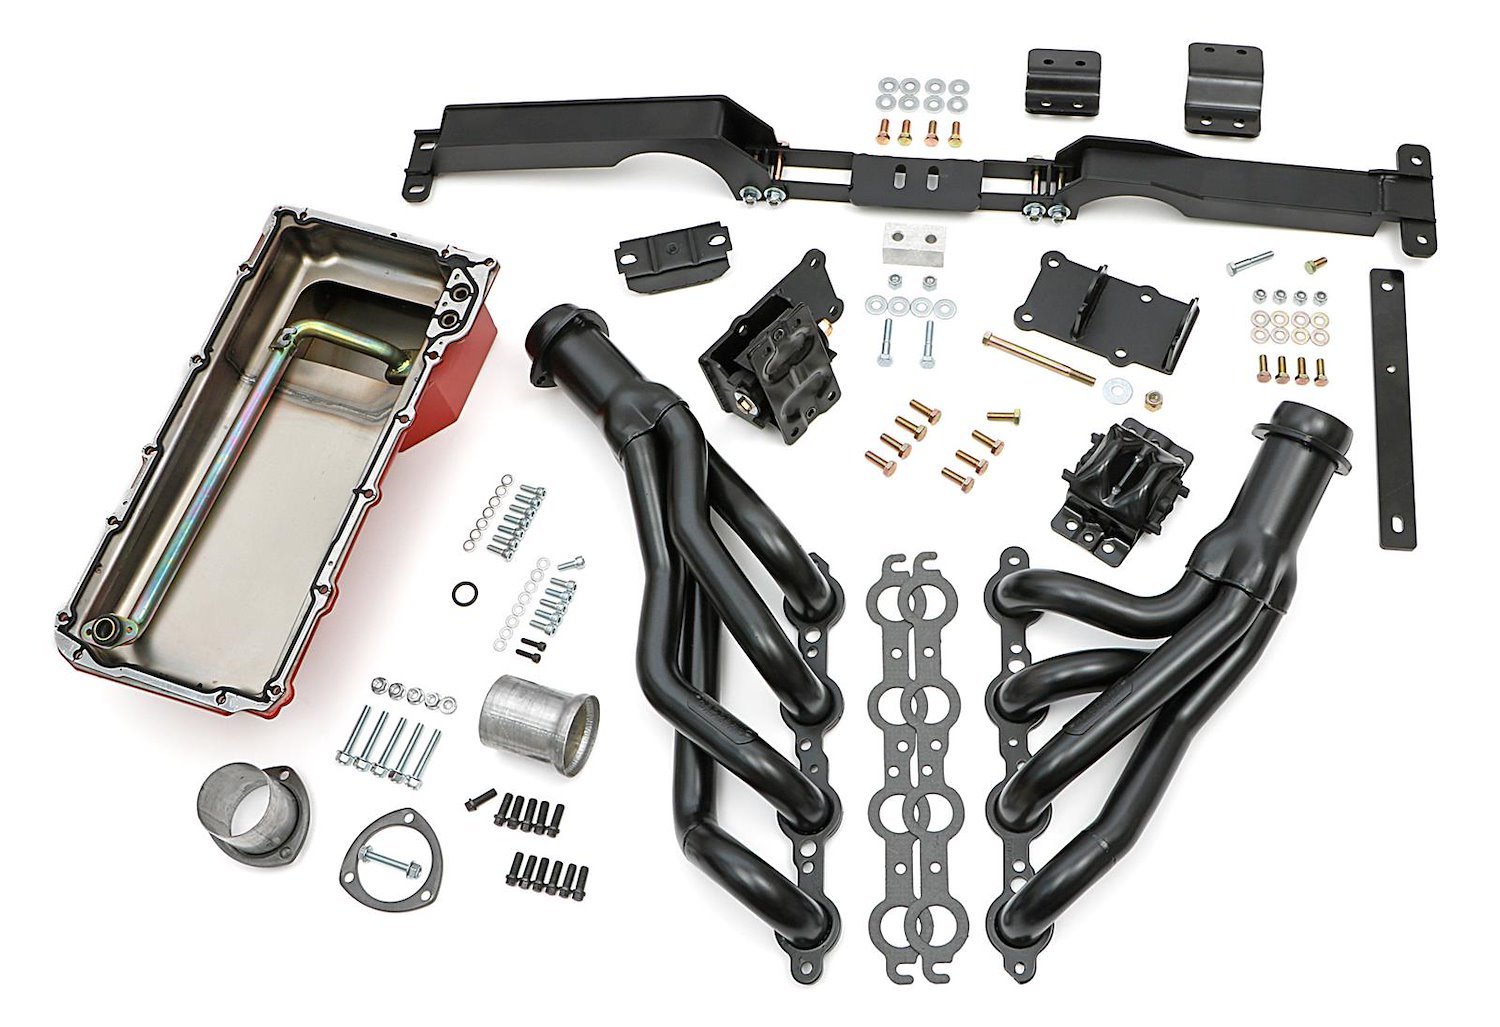 48062 Engine Swap-In-A-Box Kit for GM LS Engine, 1978-1981 GM A-Body, 1982-1988 GM G-Body